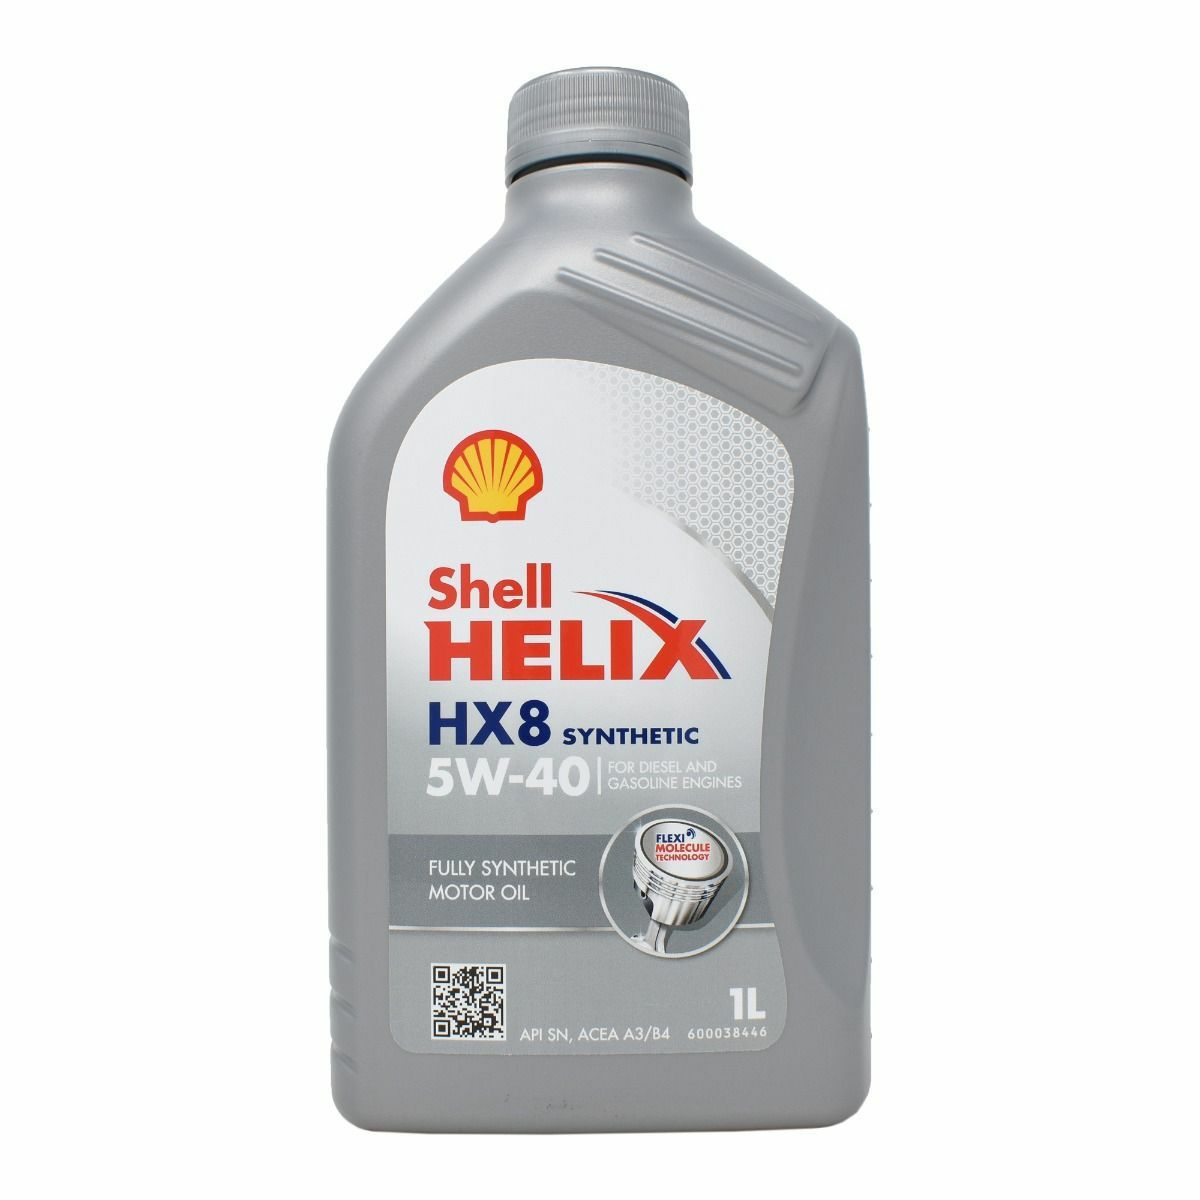 Shell Helix Hx8 5W40 - 1 Liter (Fully synthetic) [For Diesel and .